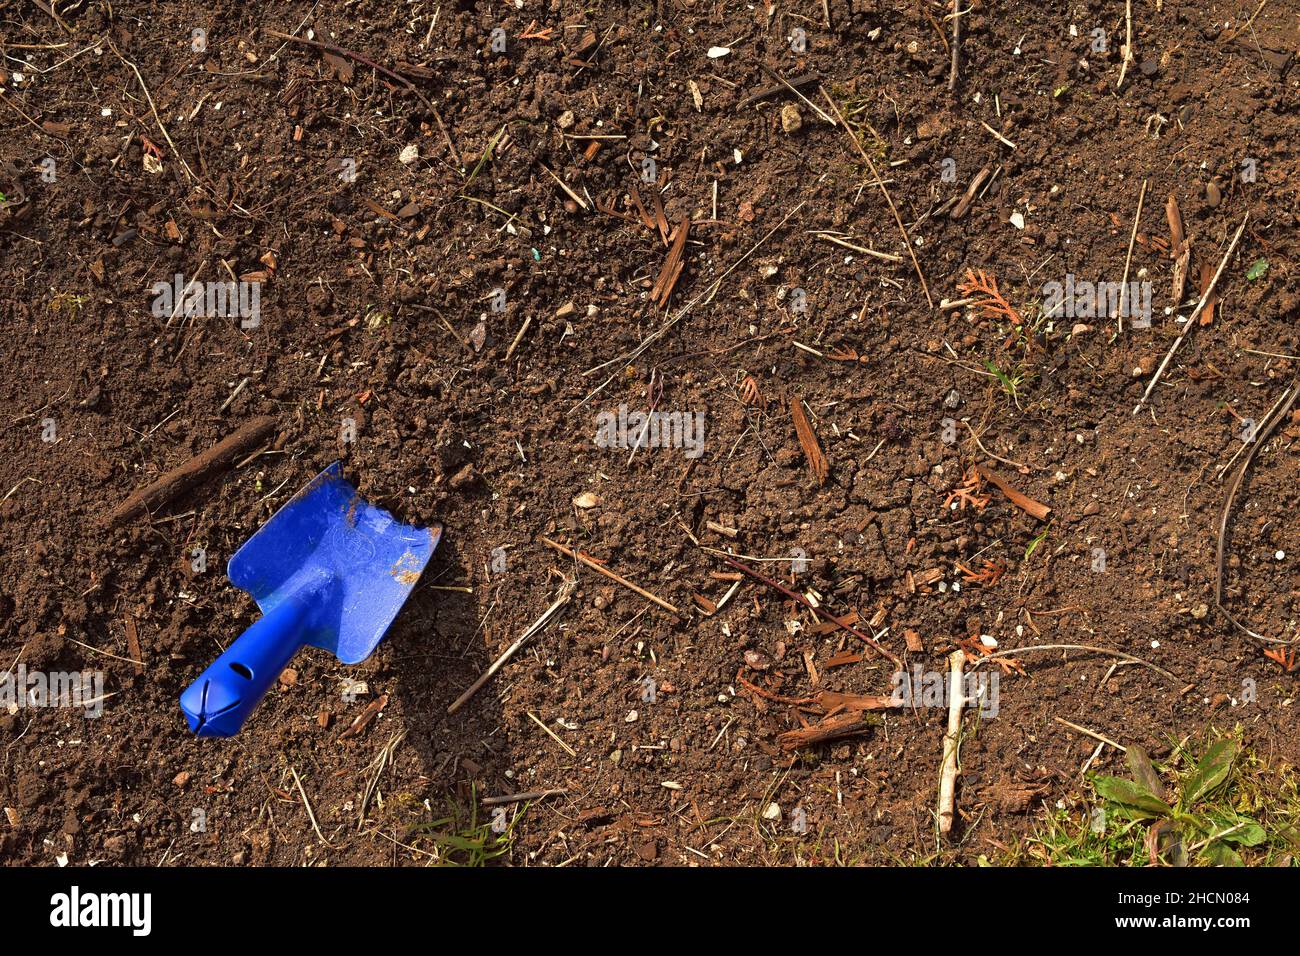 Earth from above with a blue shovel Top view Stock Photo